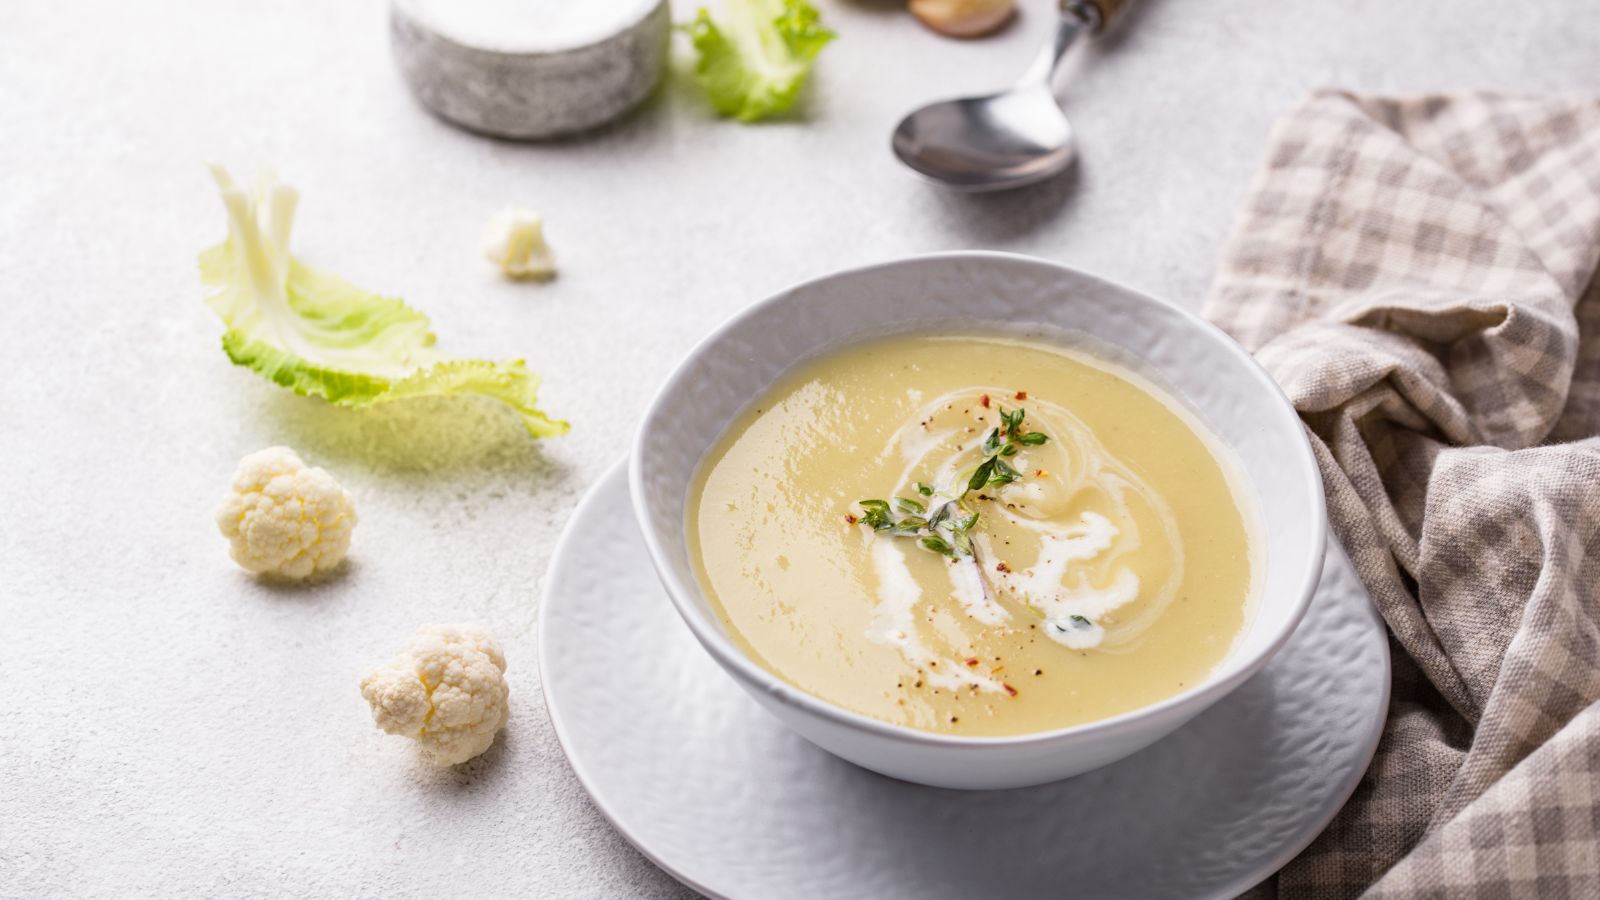 curried cauliflower soup recipe, Image of a bowl of curried cauliflower soup